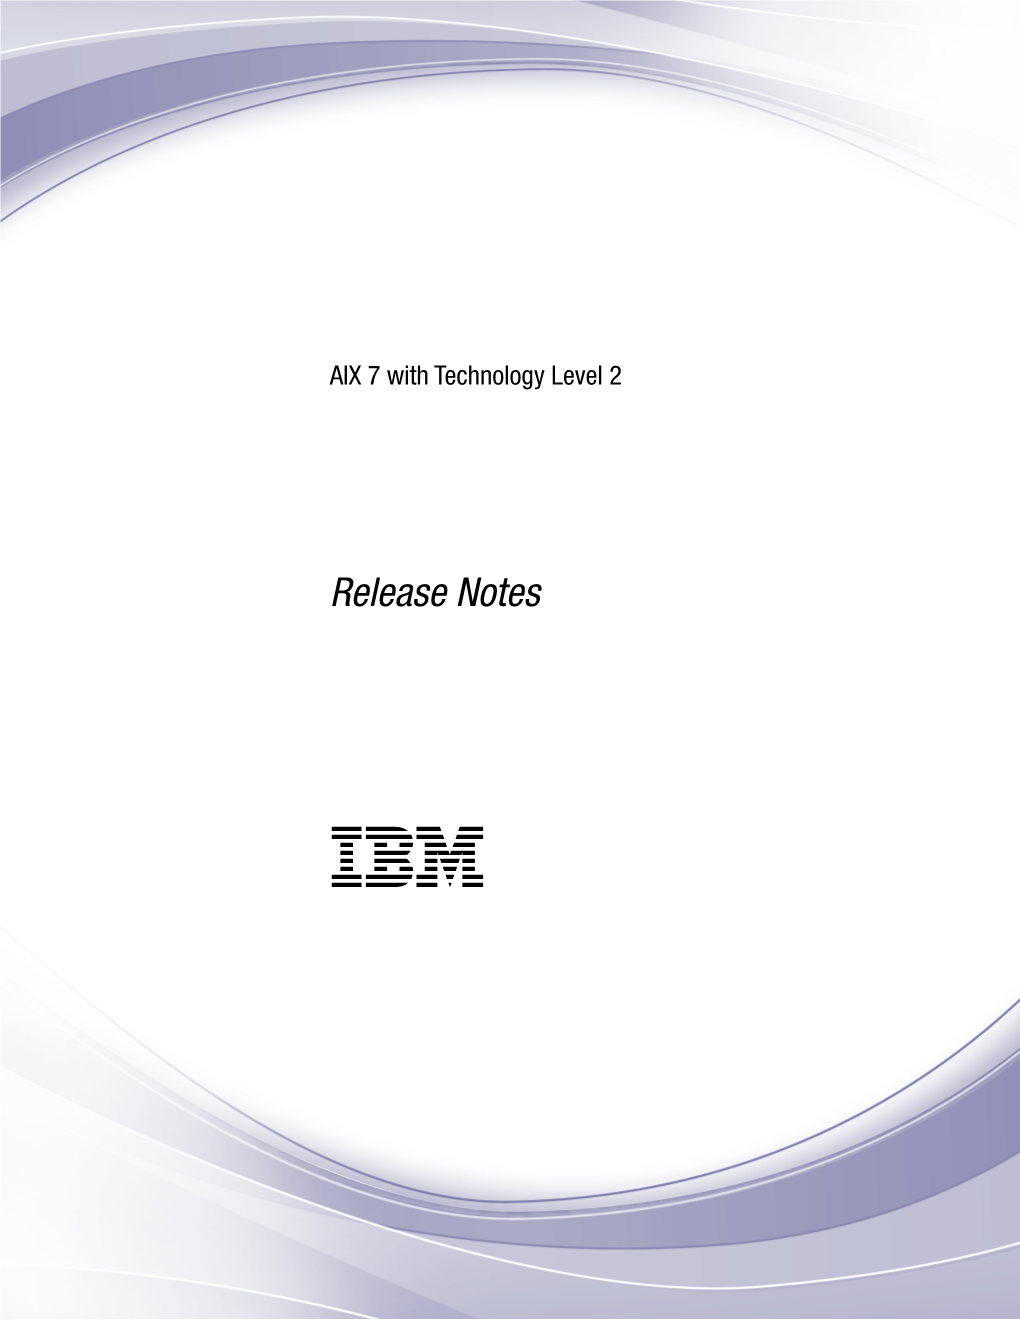 AIX 7 with Technology Level 2: Release Notes About This Document